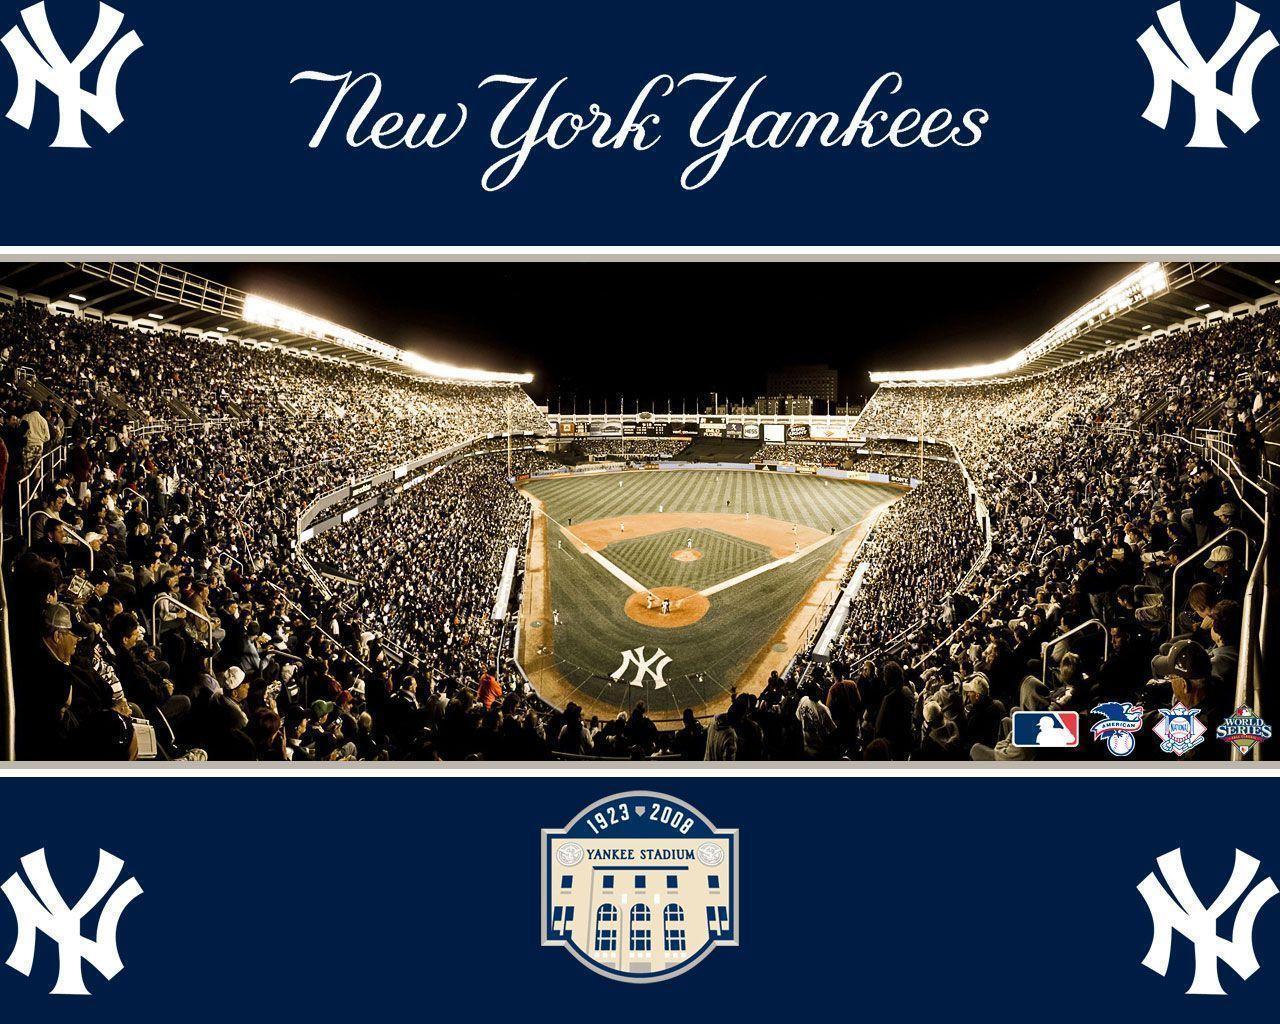 Stay reppin' with these wallpapers 👊 - New York Yankees